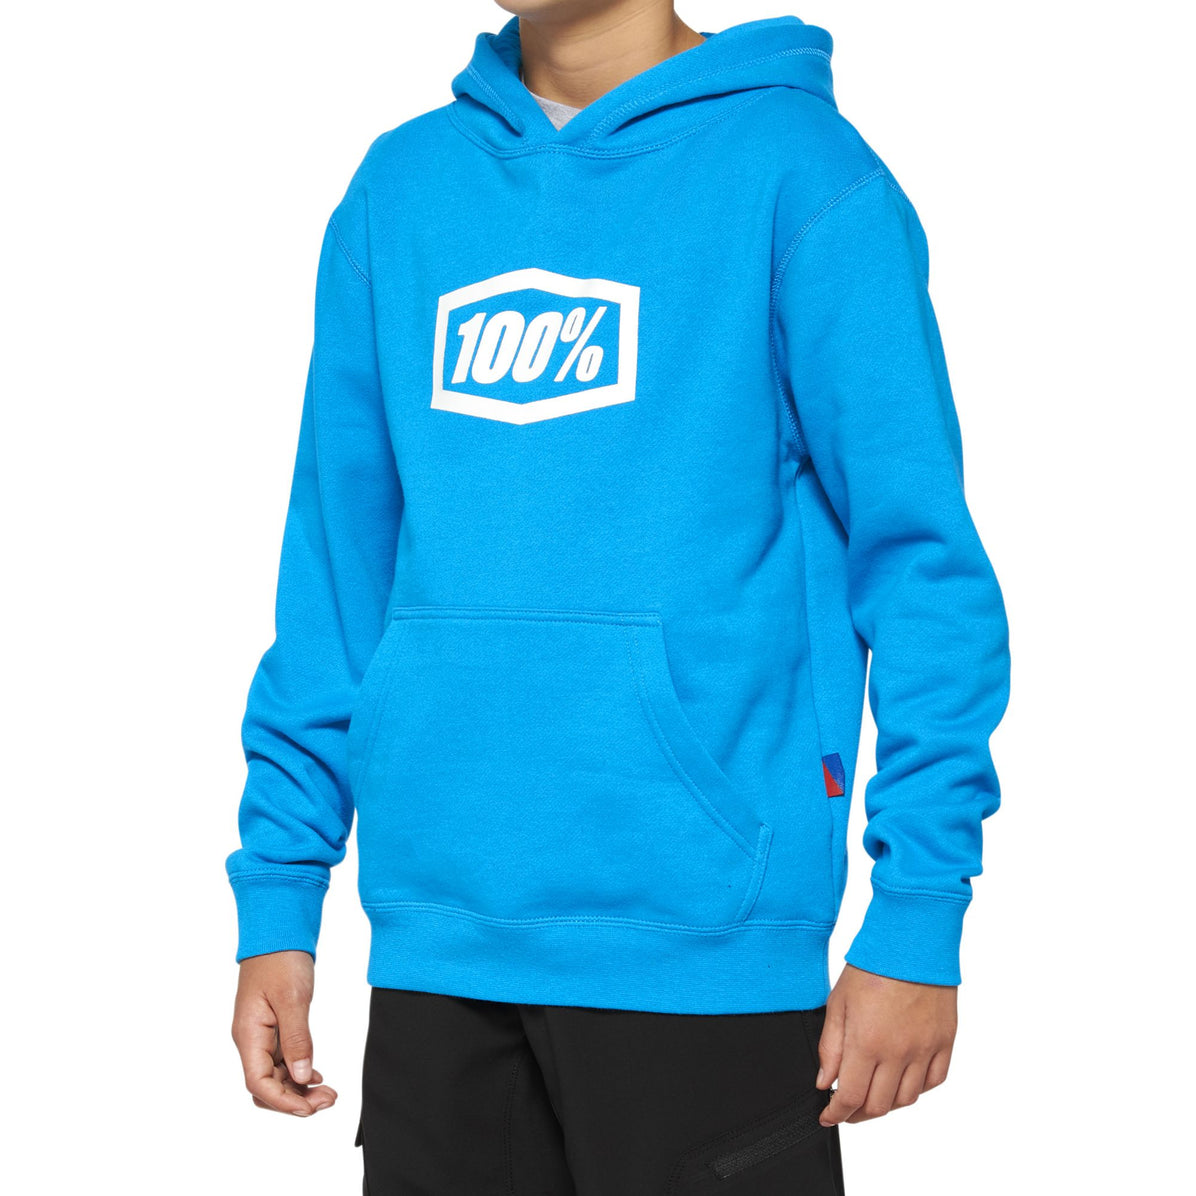 100% Icon Pullover Youth Hoodie